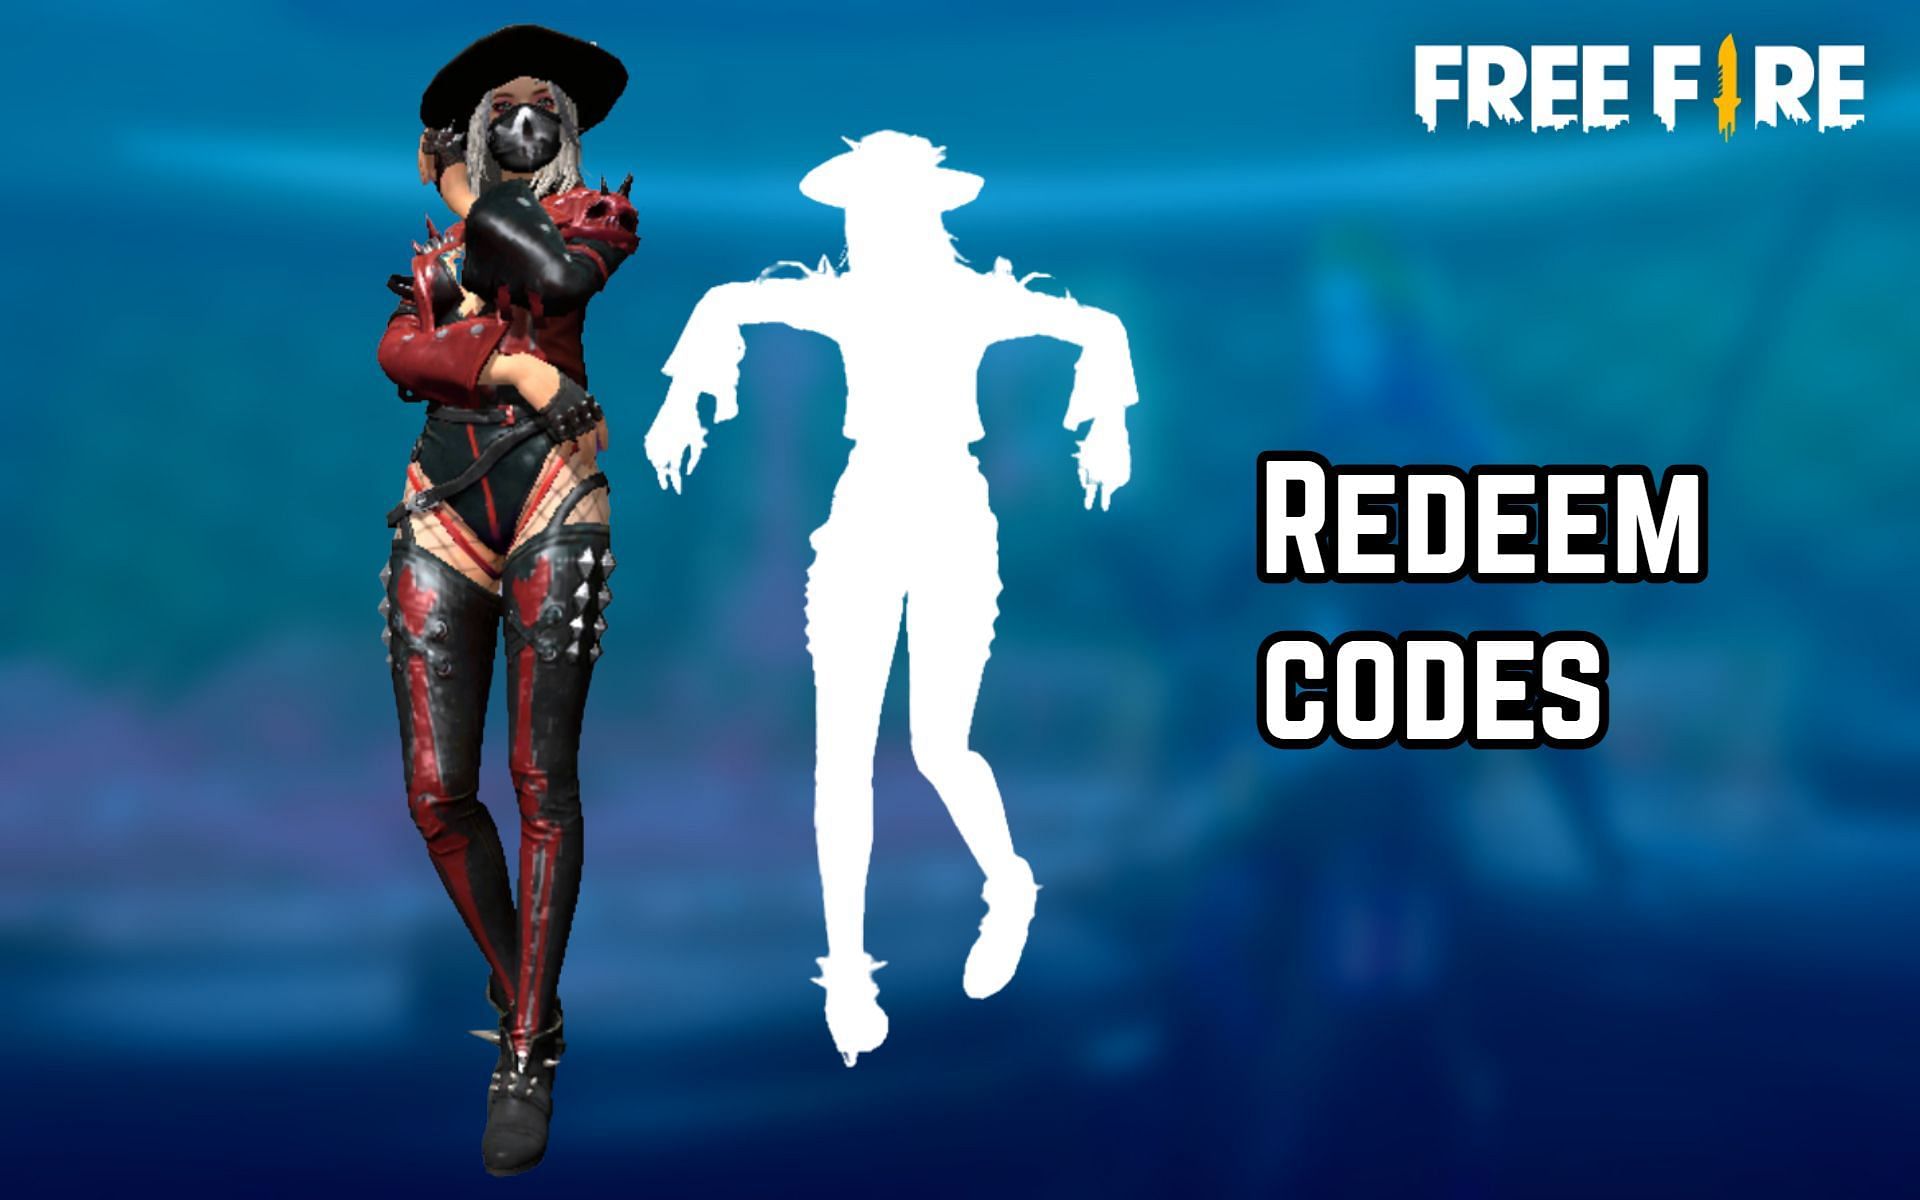 Many Free Fire users patiently wait for the release of redeem codes (Image via Sportskeeda)